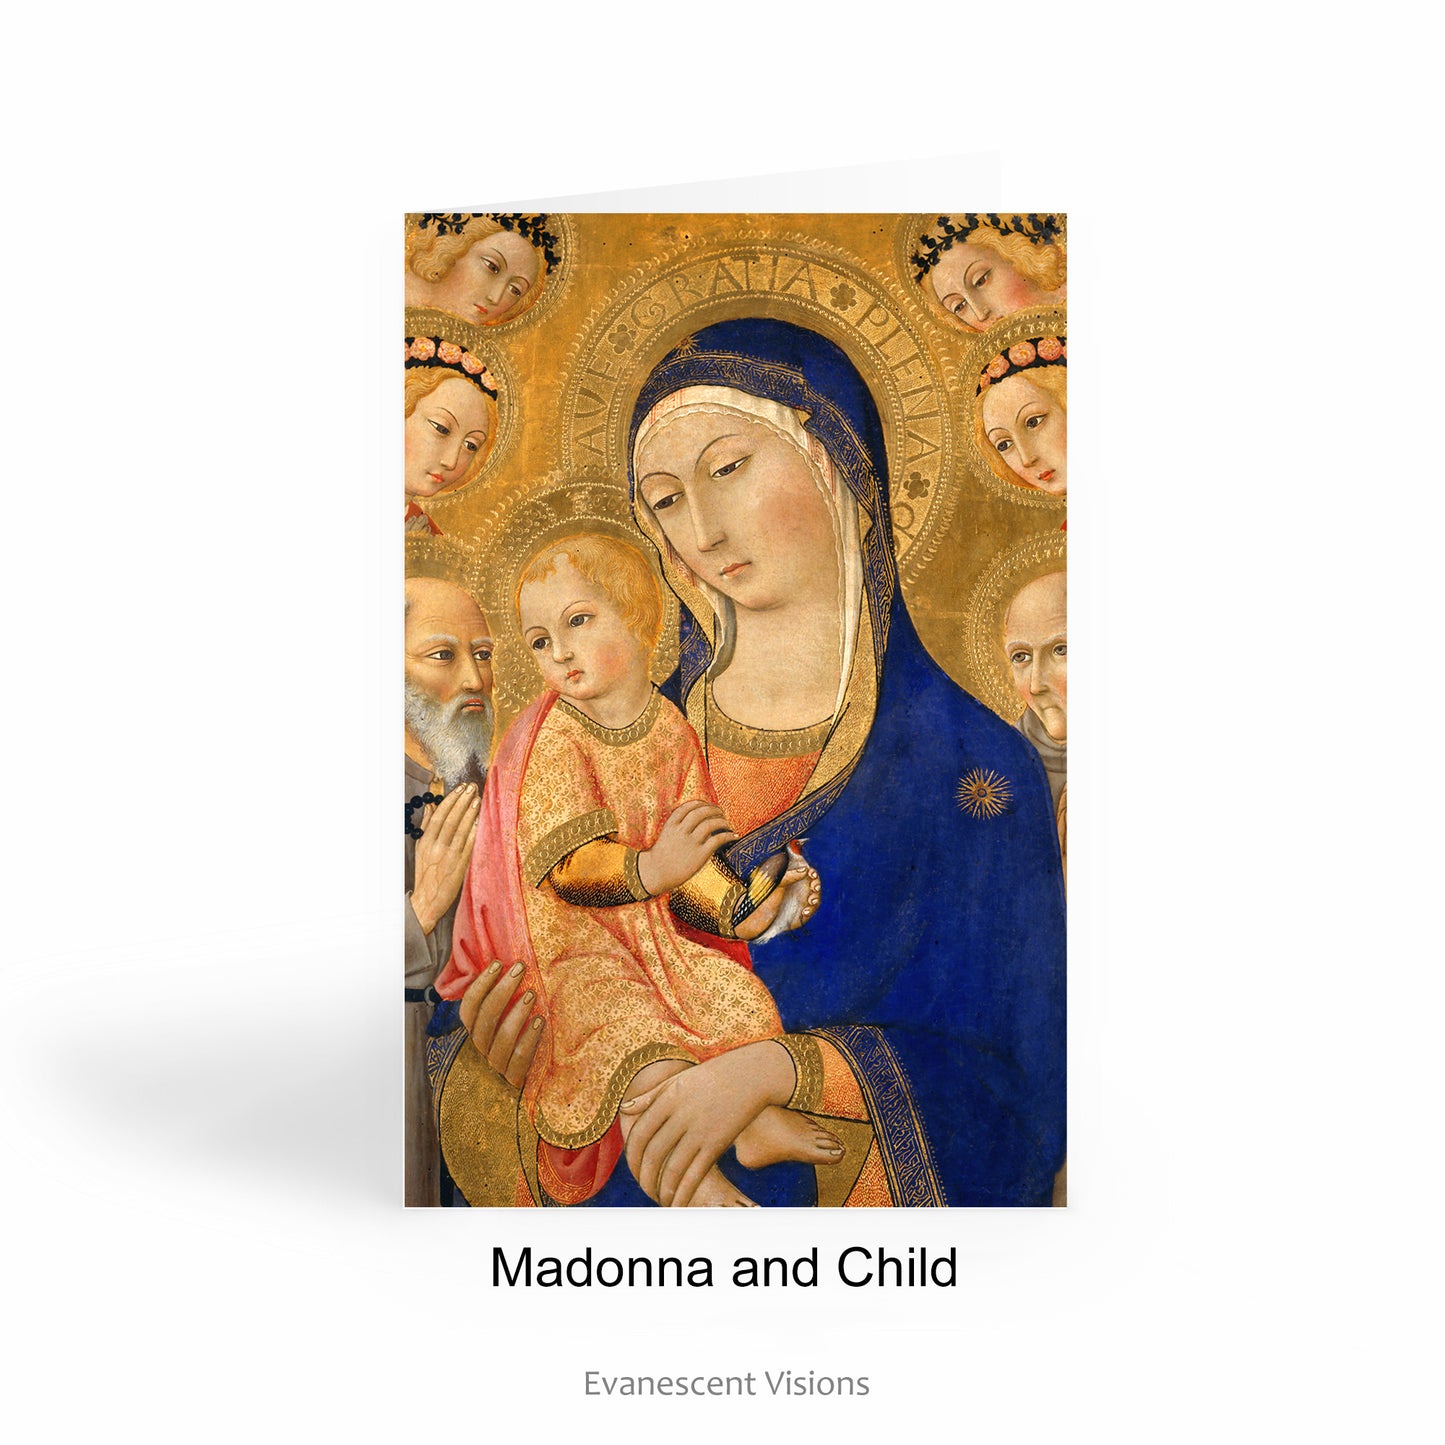 Madonna and Child painting religious art card